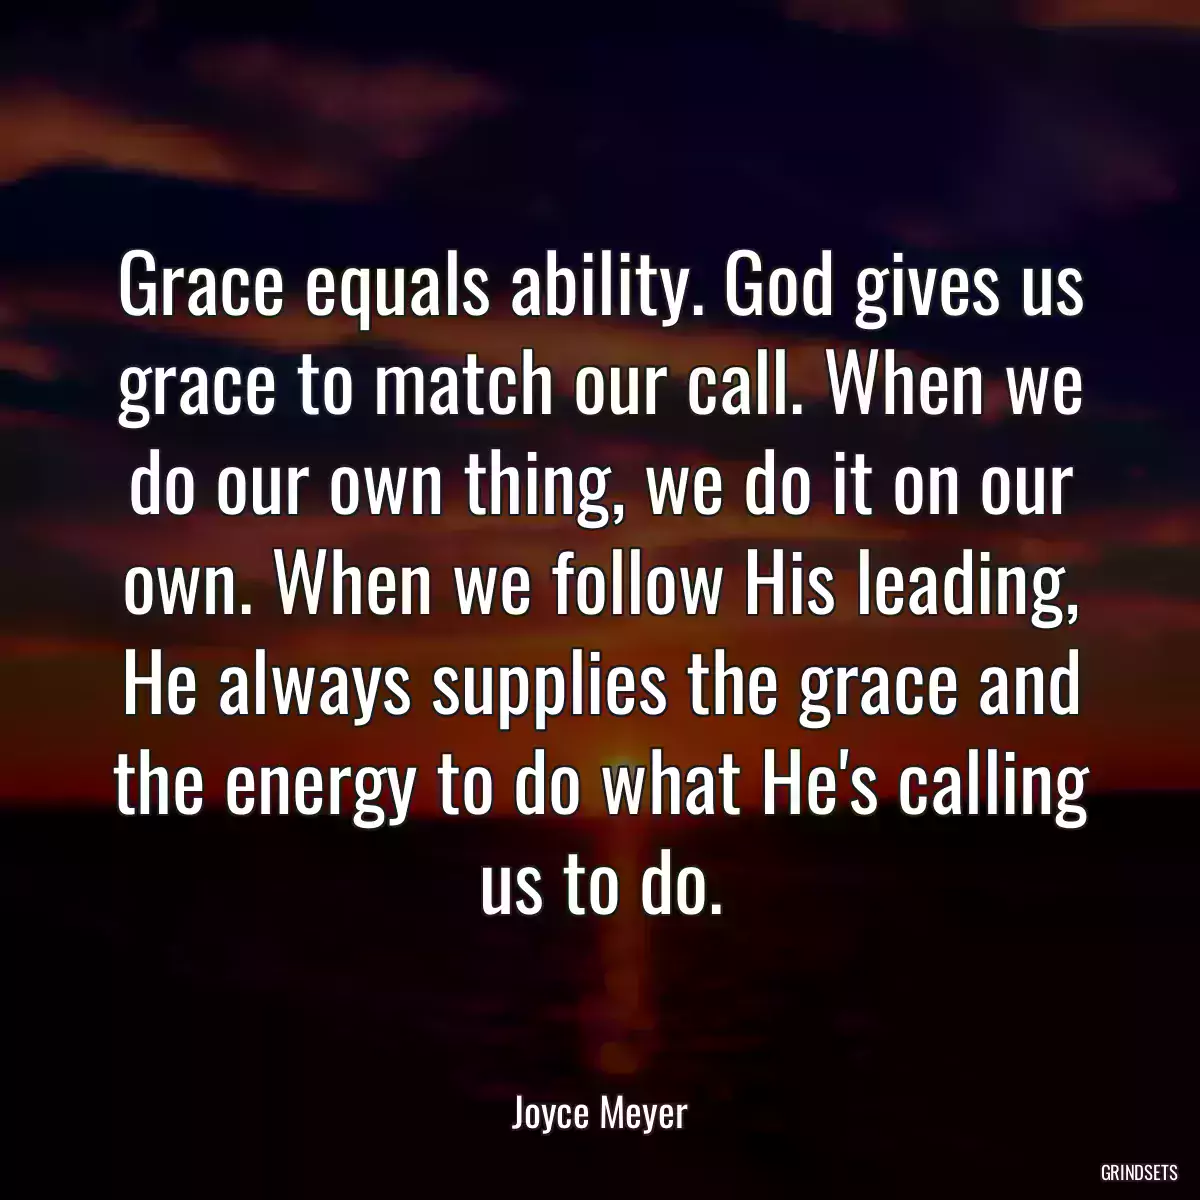 Grace equals ability. God gives us grace to match our call. When we do our own thing, we do it on our own. When we follow His leading, He always supplies the grace and the energy to do what He\'s calling us to do.